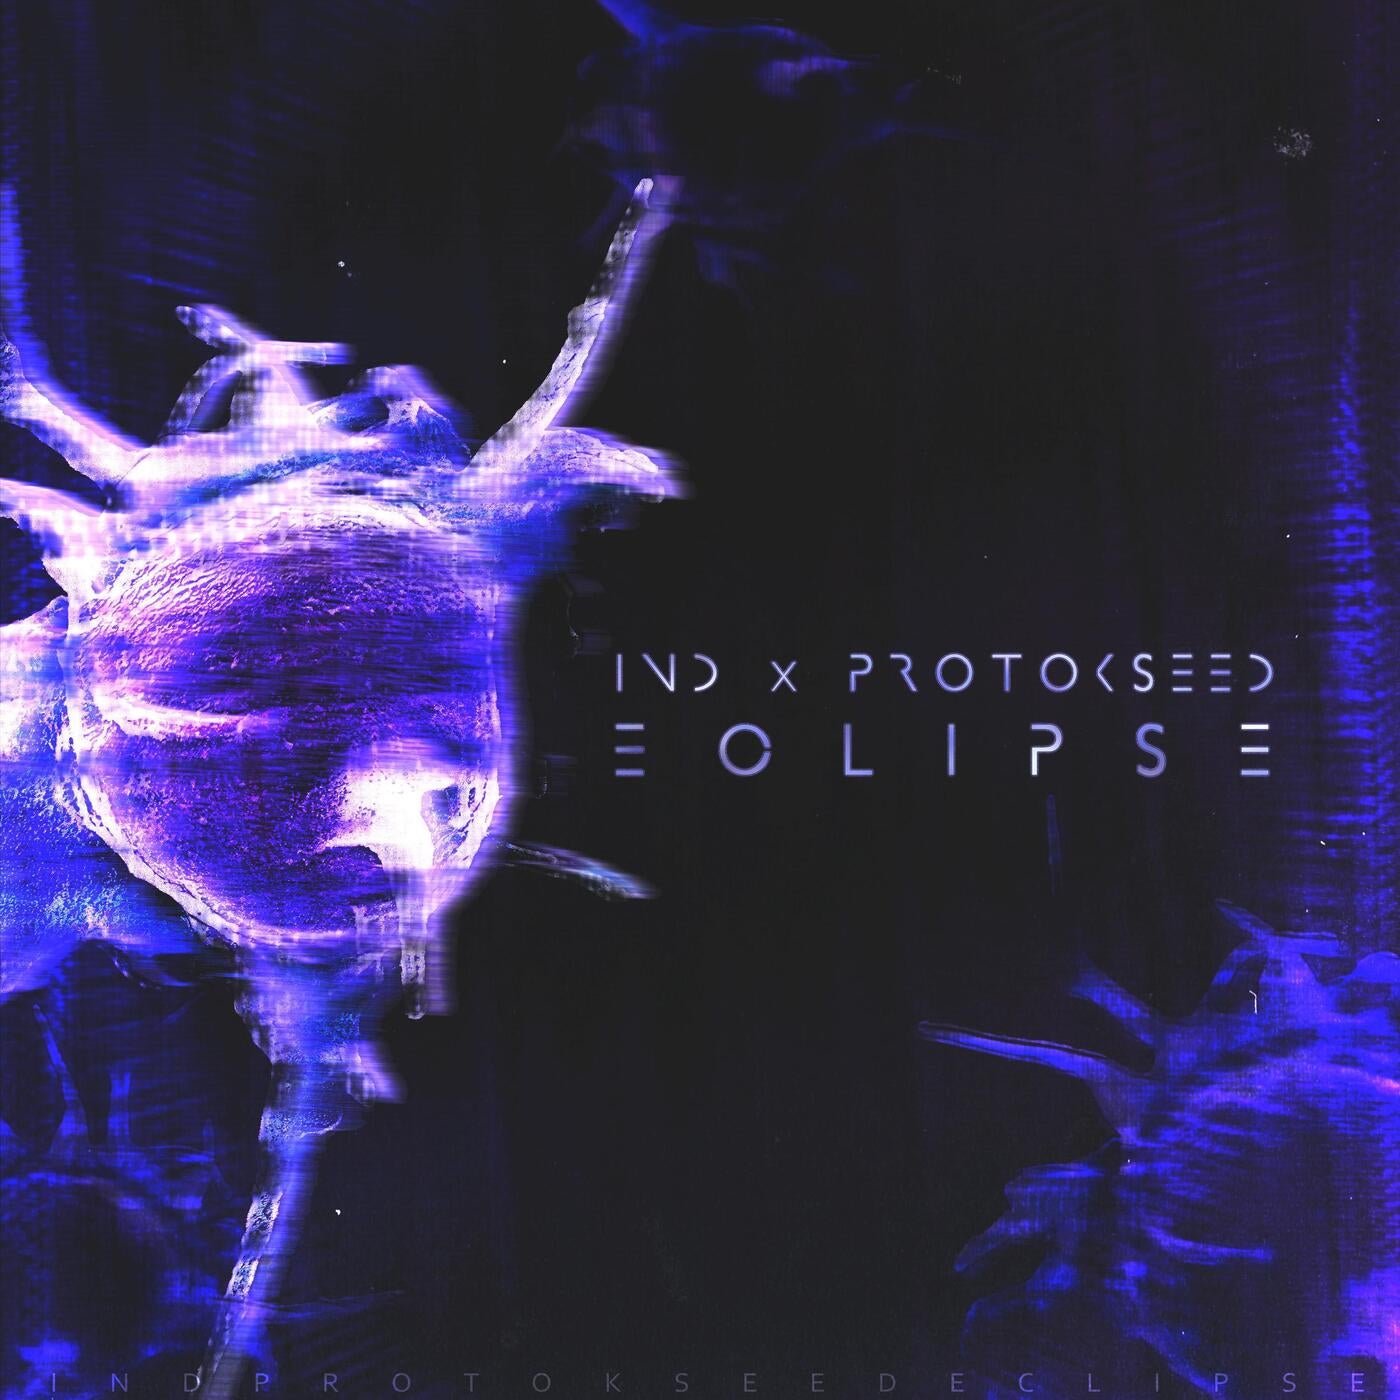 Eclipse (feat. Protokseed)